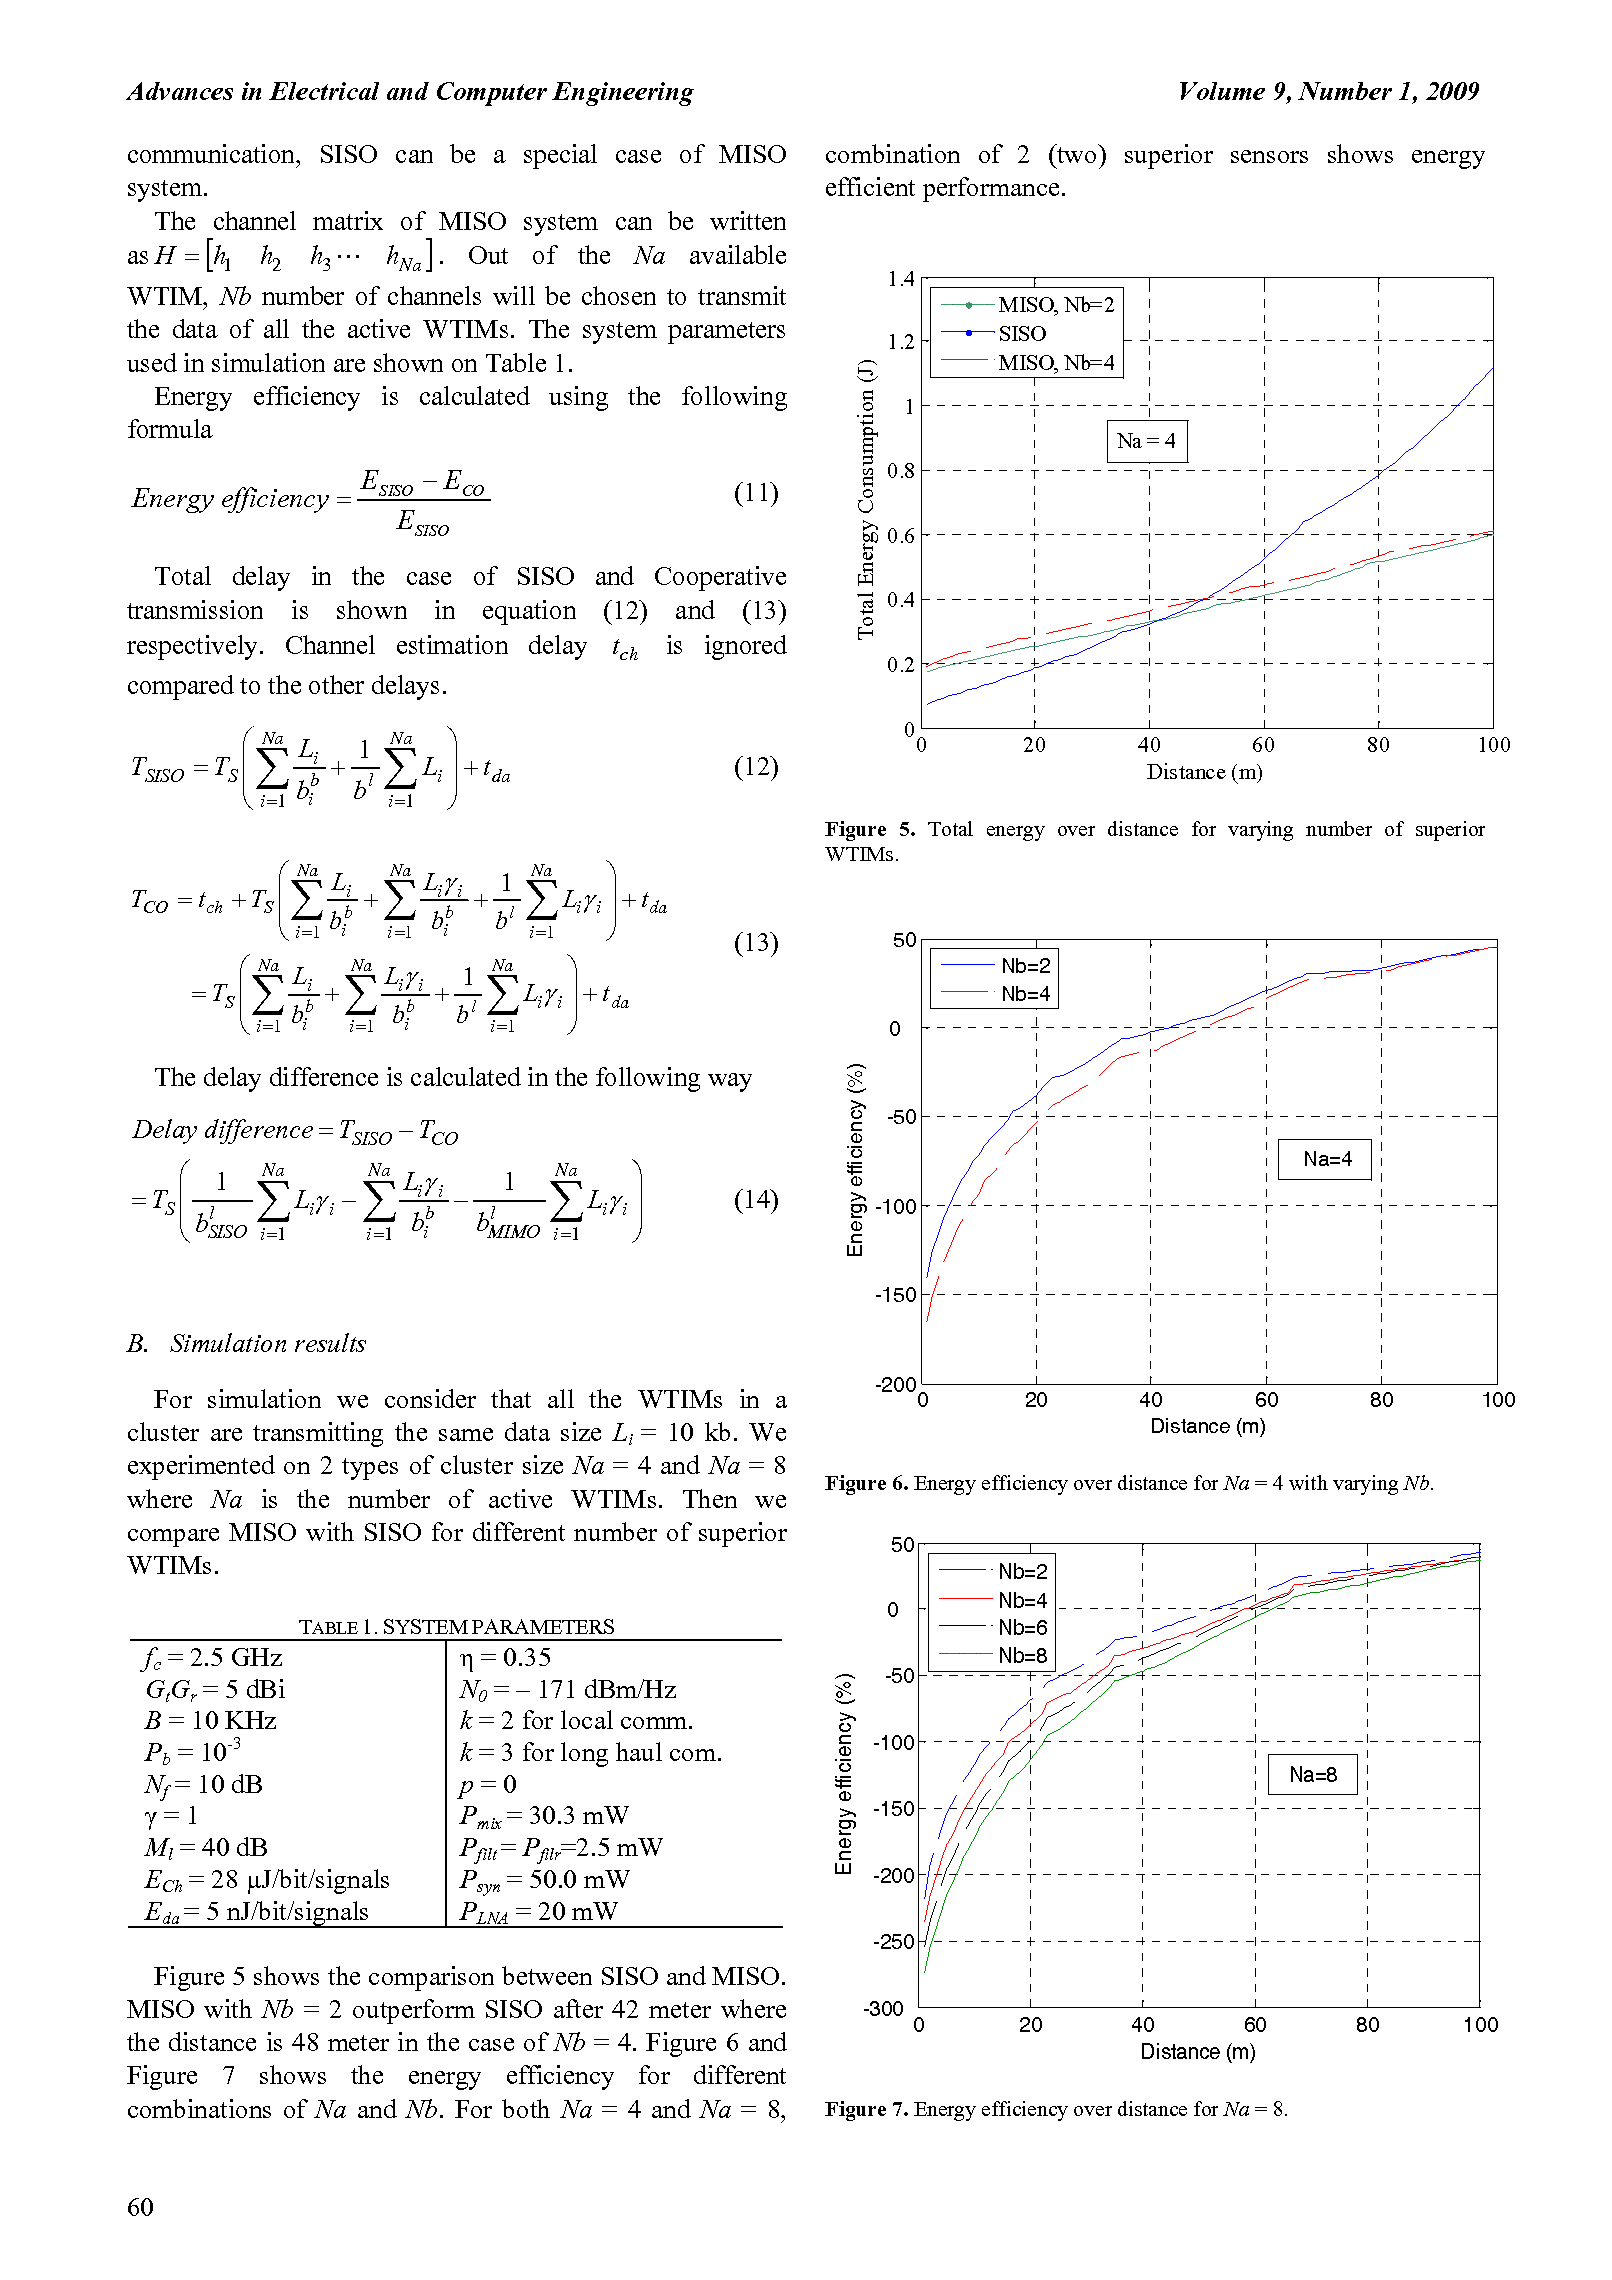 PDF Quickview for paper with DOI:10.4316/AECE.2009.01010